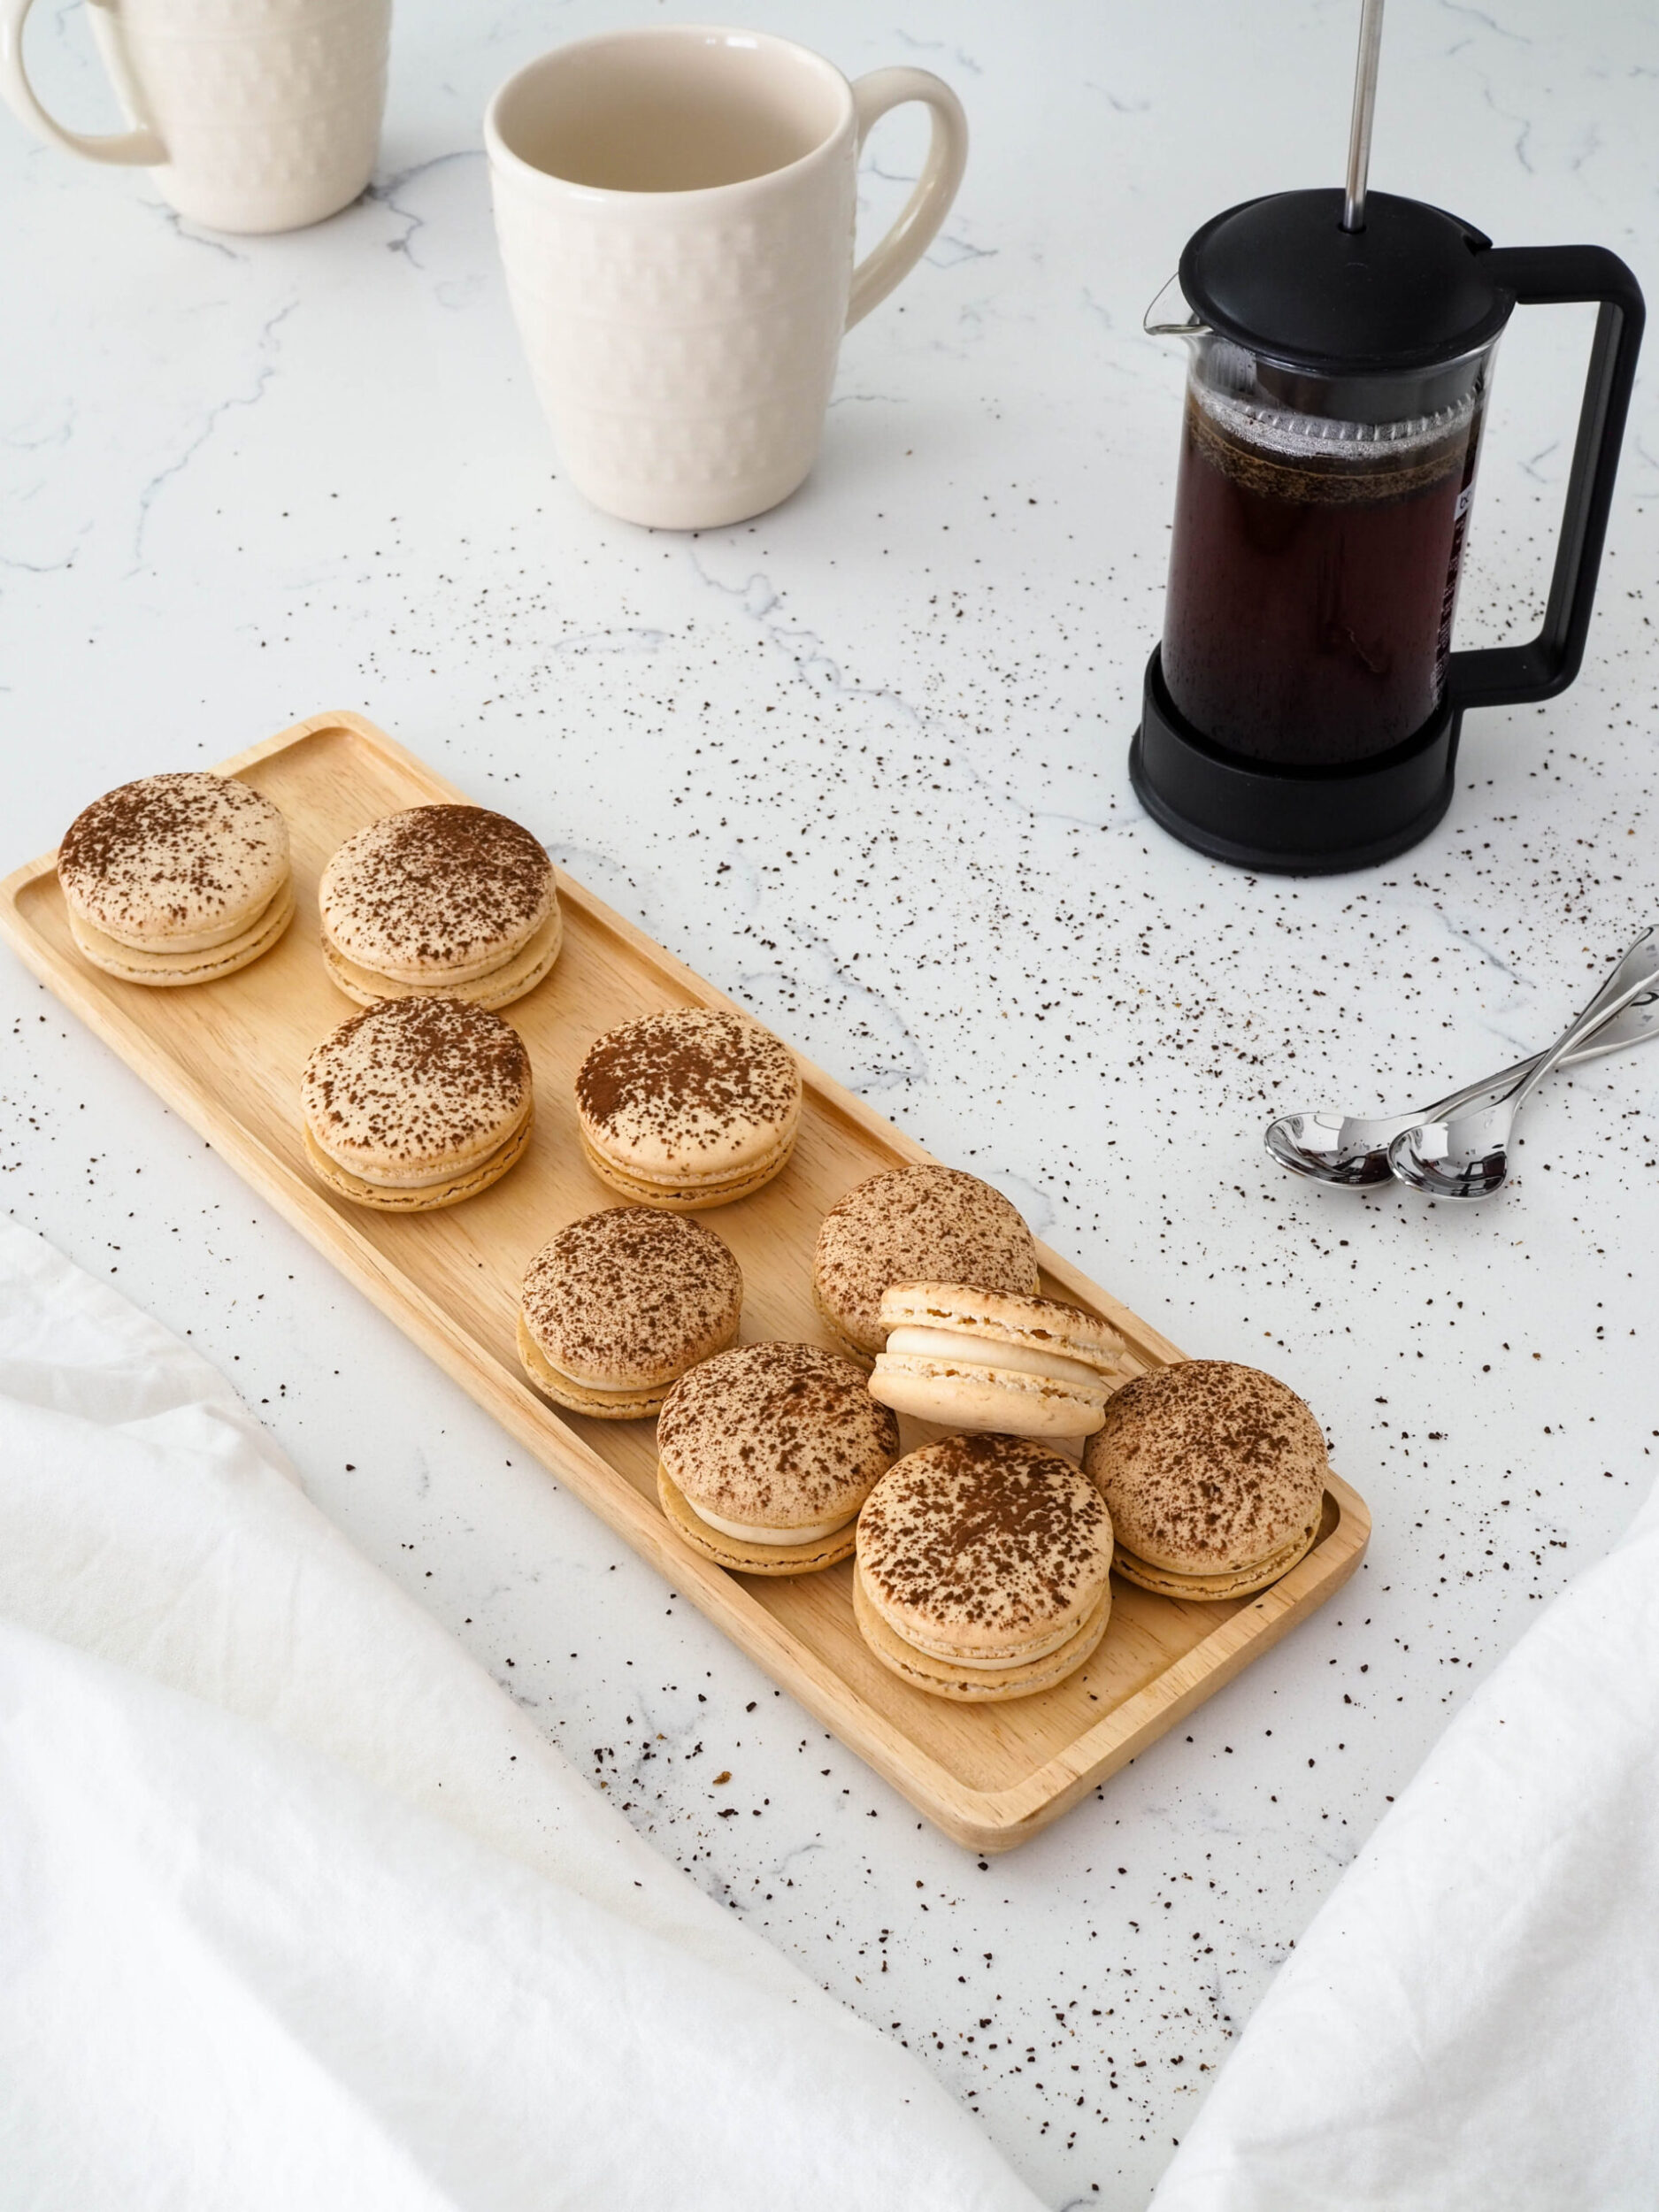 Tiramisu macarons on a wooden platter, with a French press filled with coffee nearby.